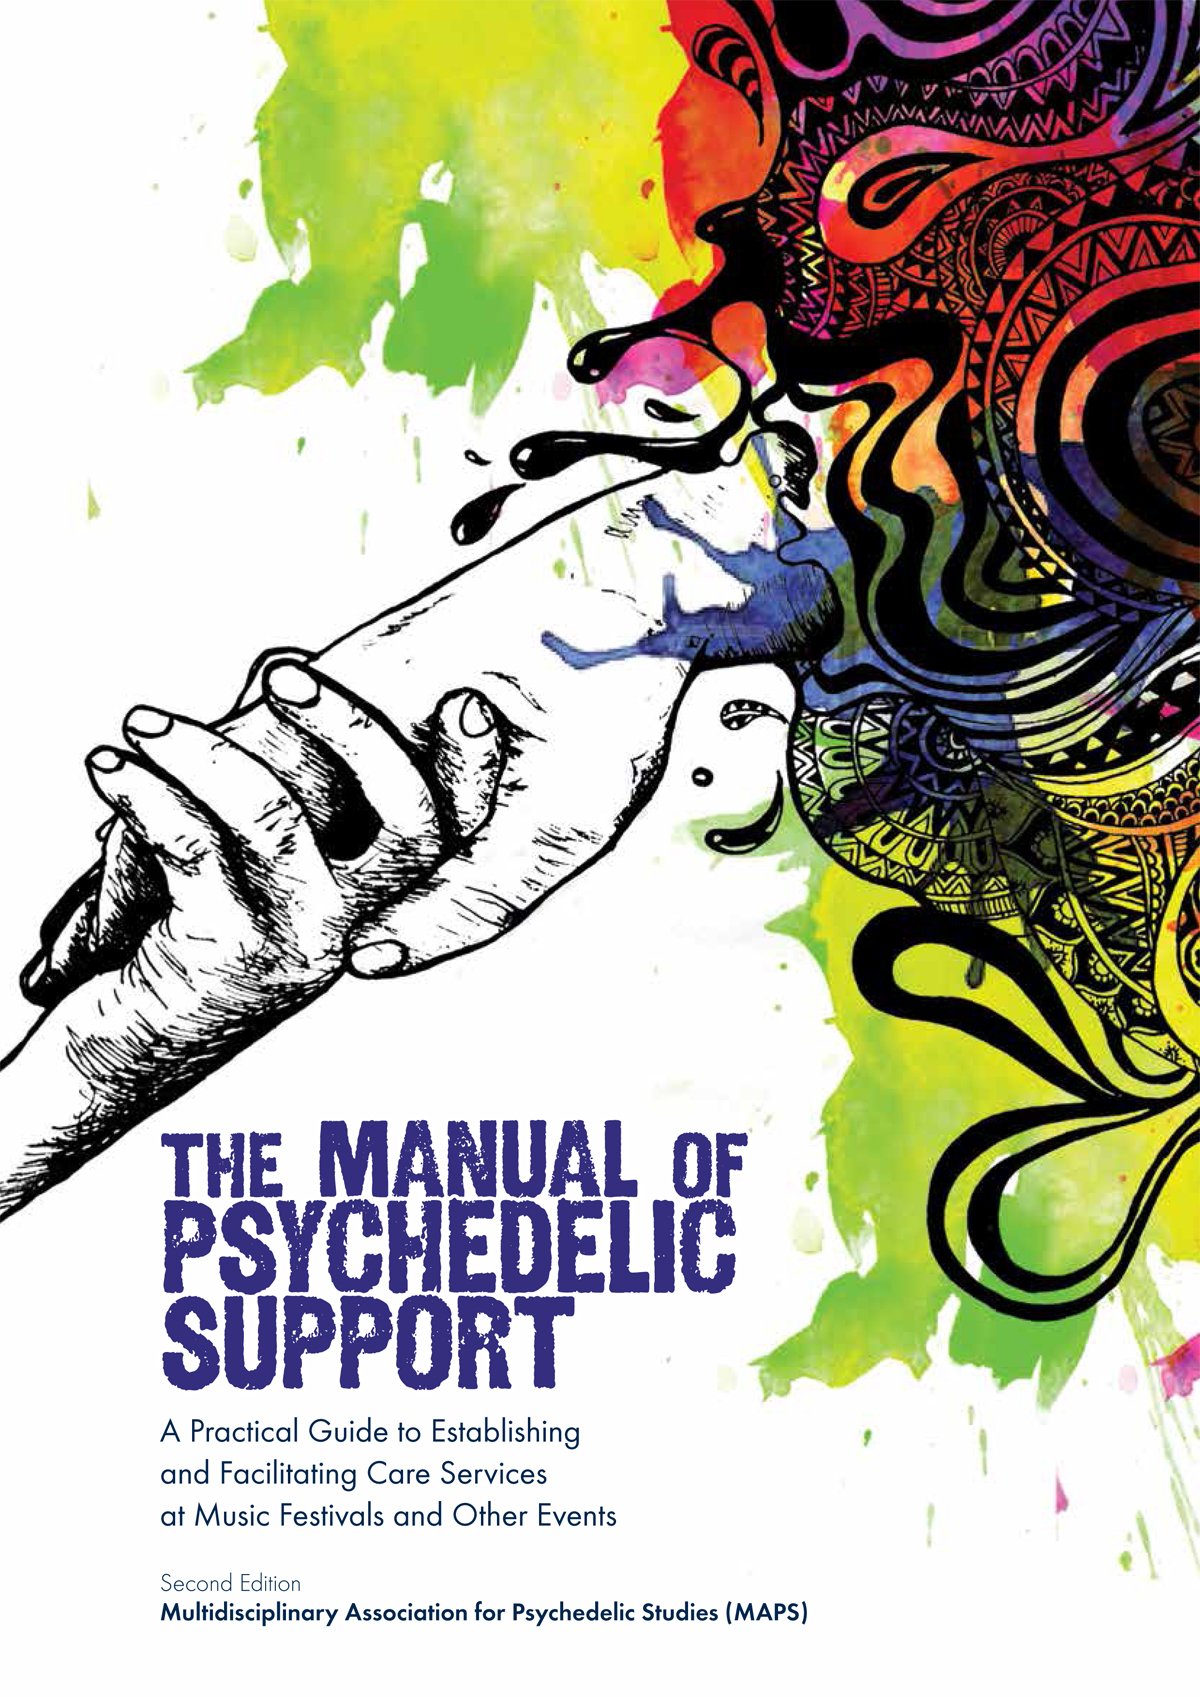 Annie Oak, Jon Hanna: The Manual of Psychedelic Support (‎ Multidisciplinary Association for Psychedelic Studies)